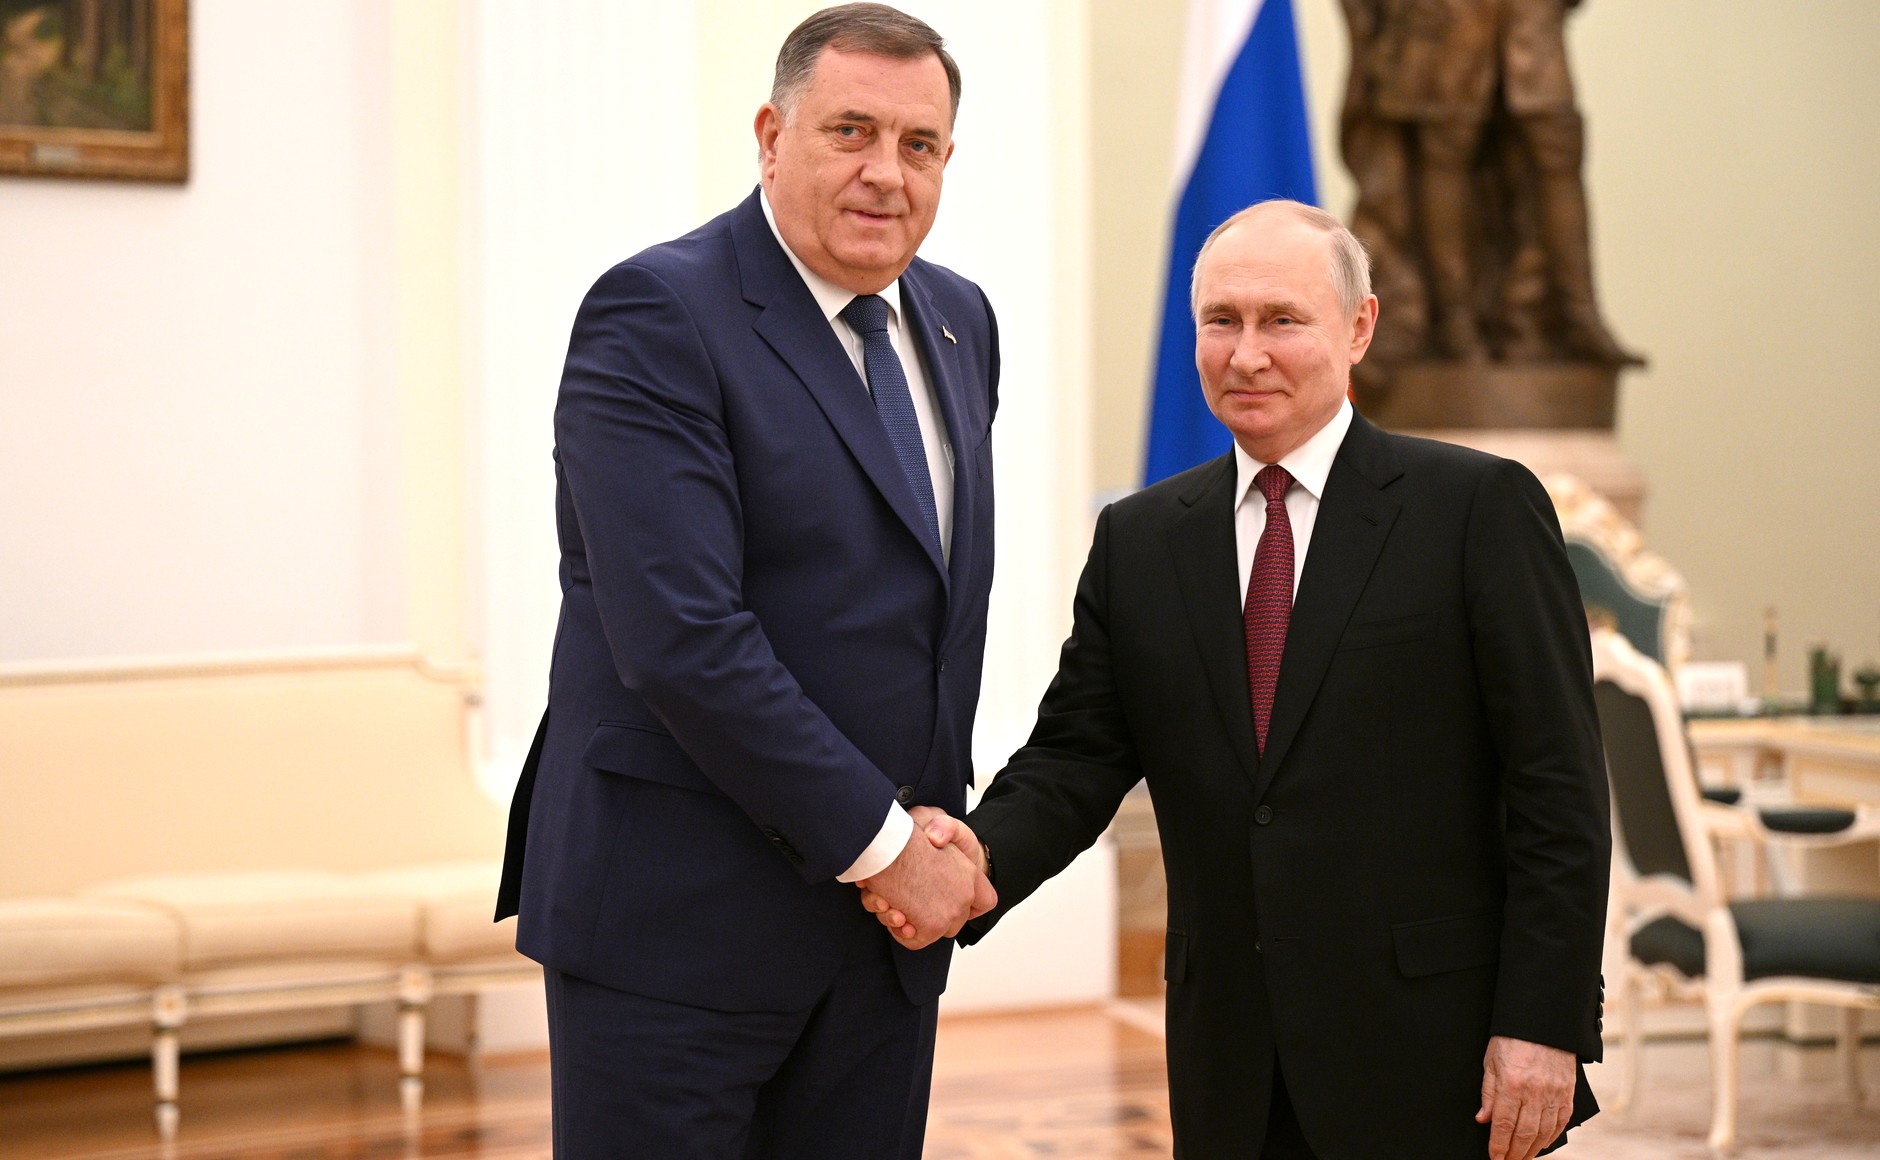 Dodik In Moscow: The Policy Of Subservience To The West Has Been Rejected By Us